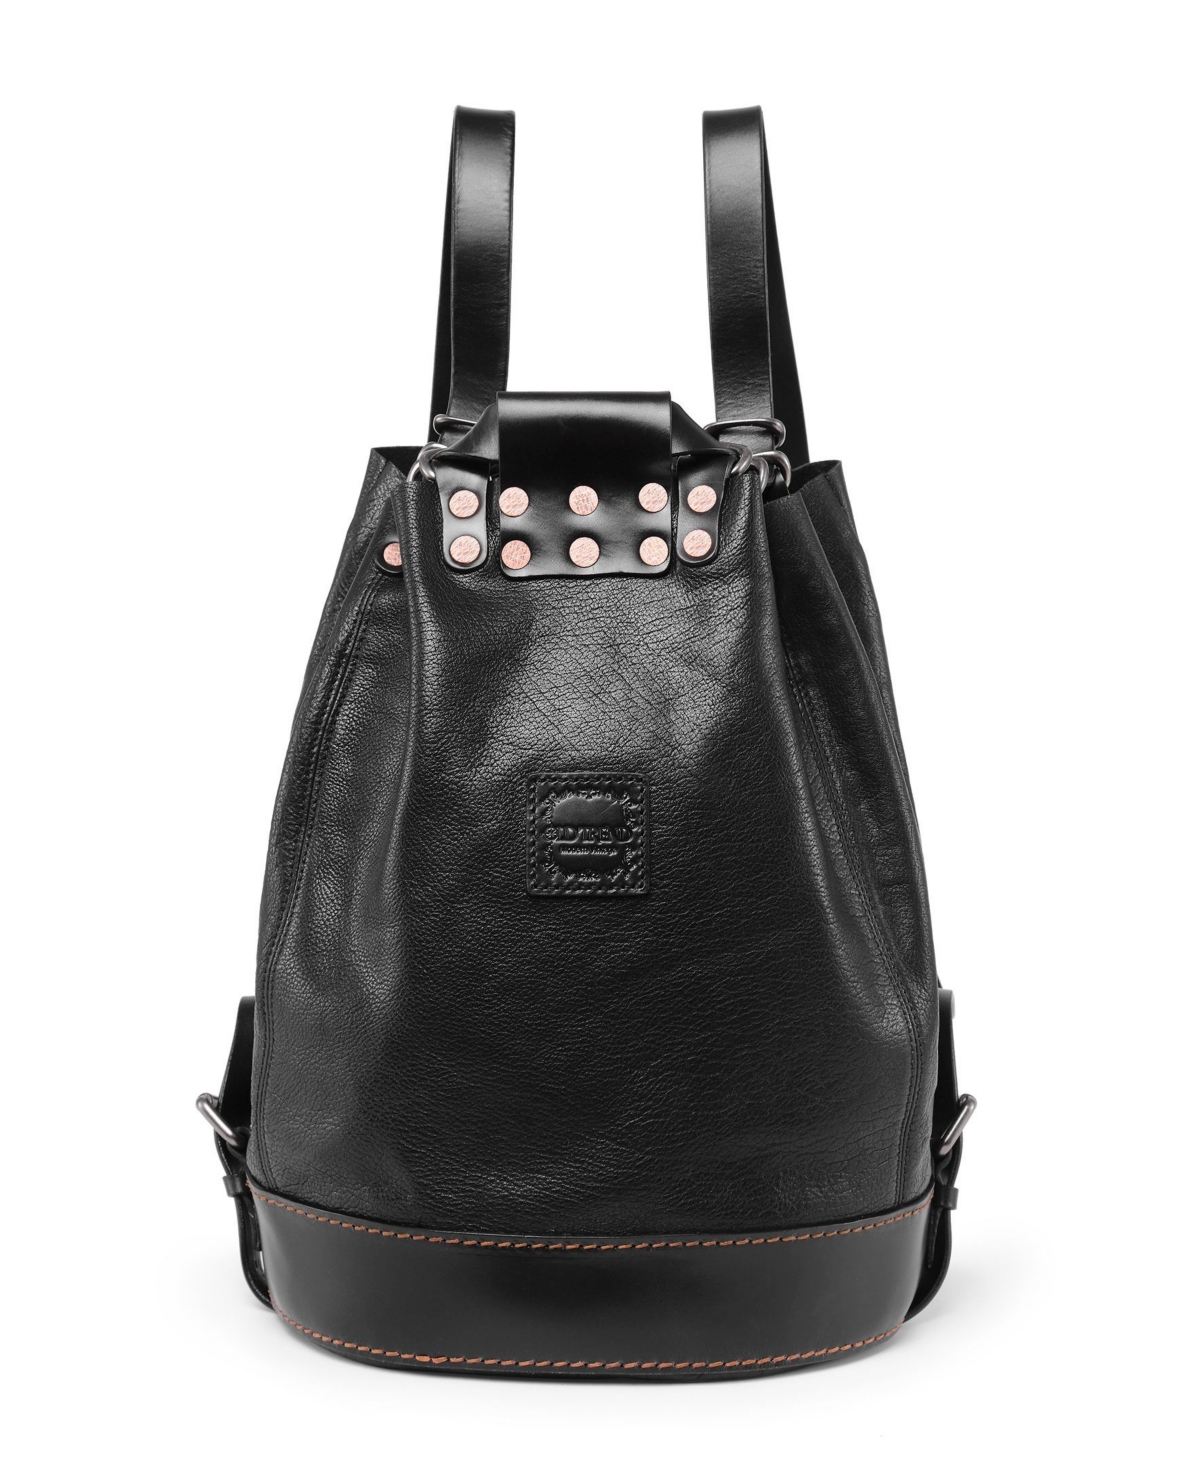 Women's Genuine Leather Canna Backpack - Cognac